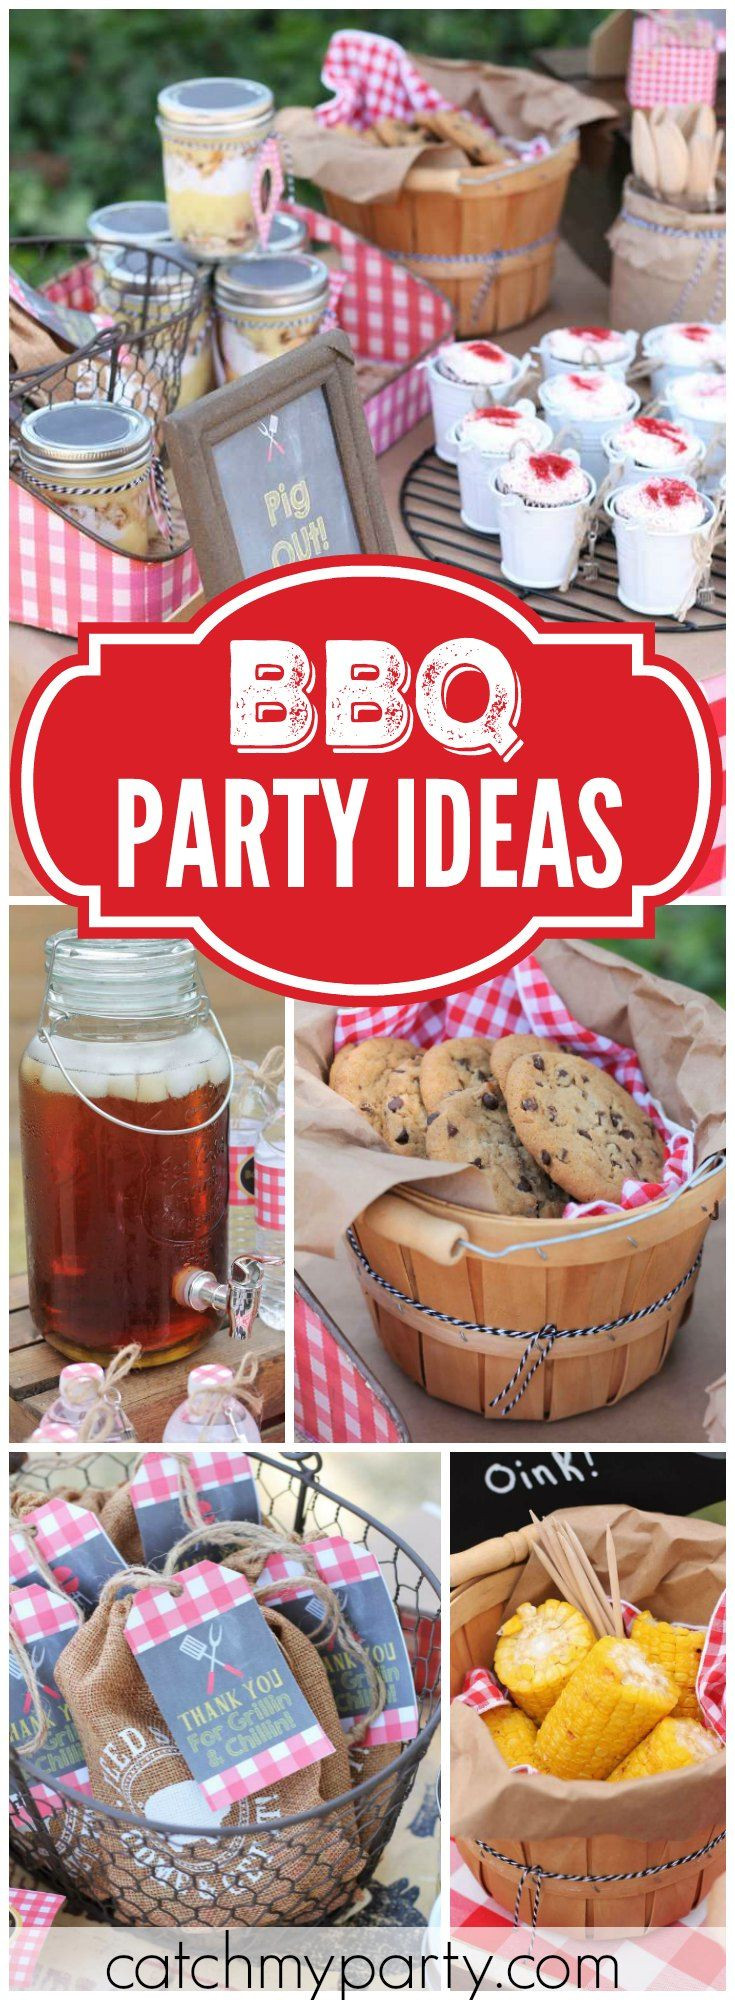 Cool Backyard Party Ideas
 How great is this patriotic backyard summer BBQ party See